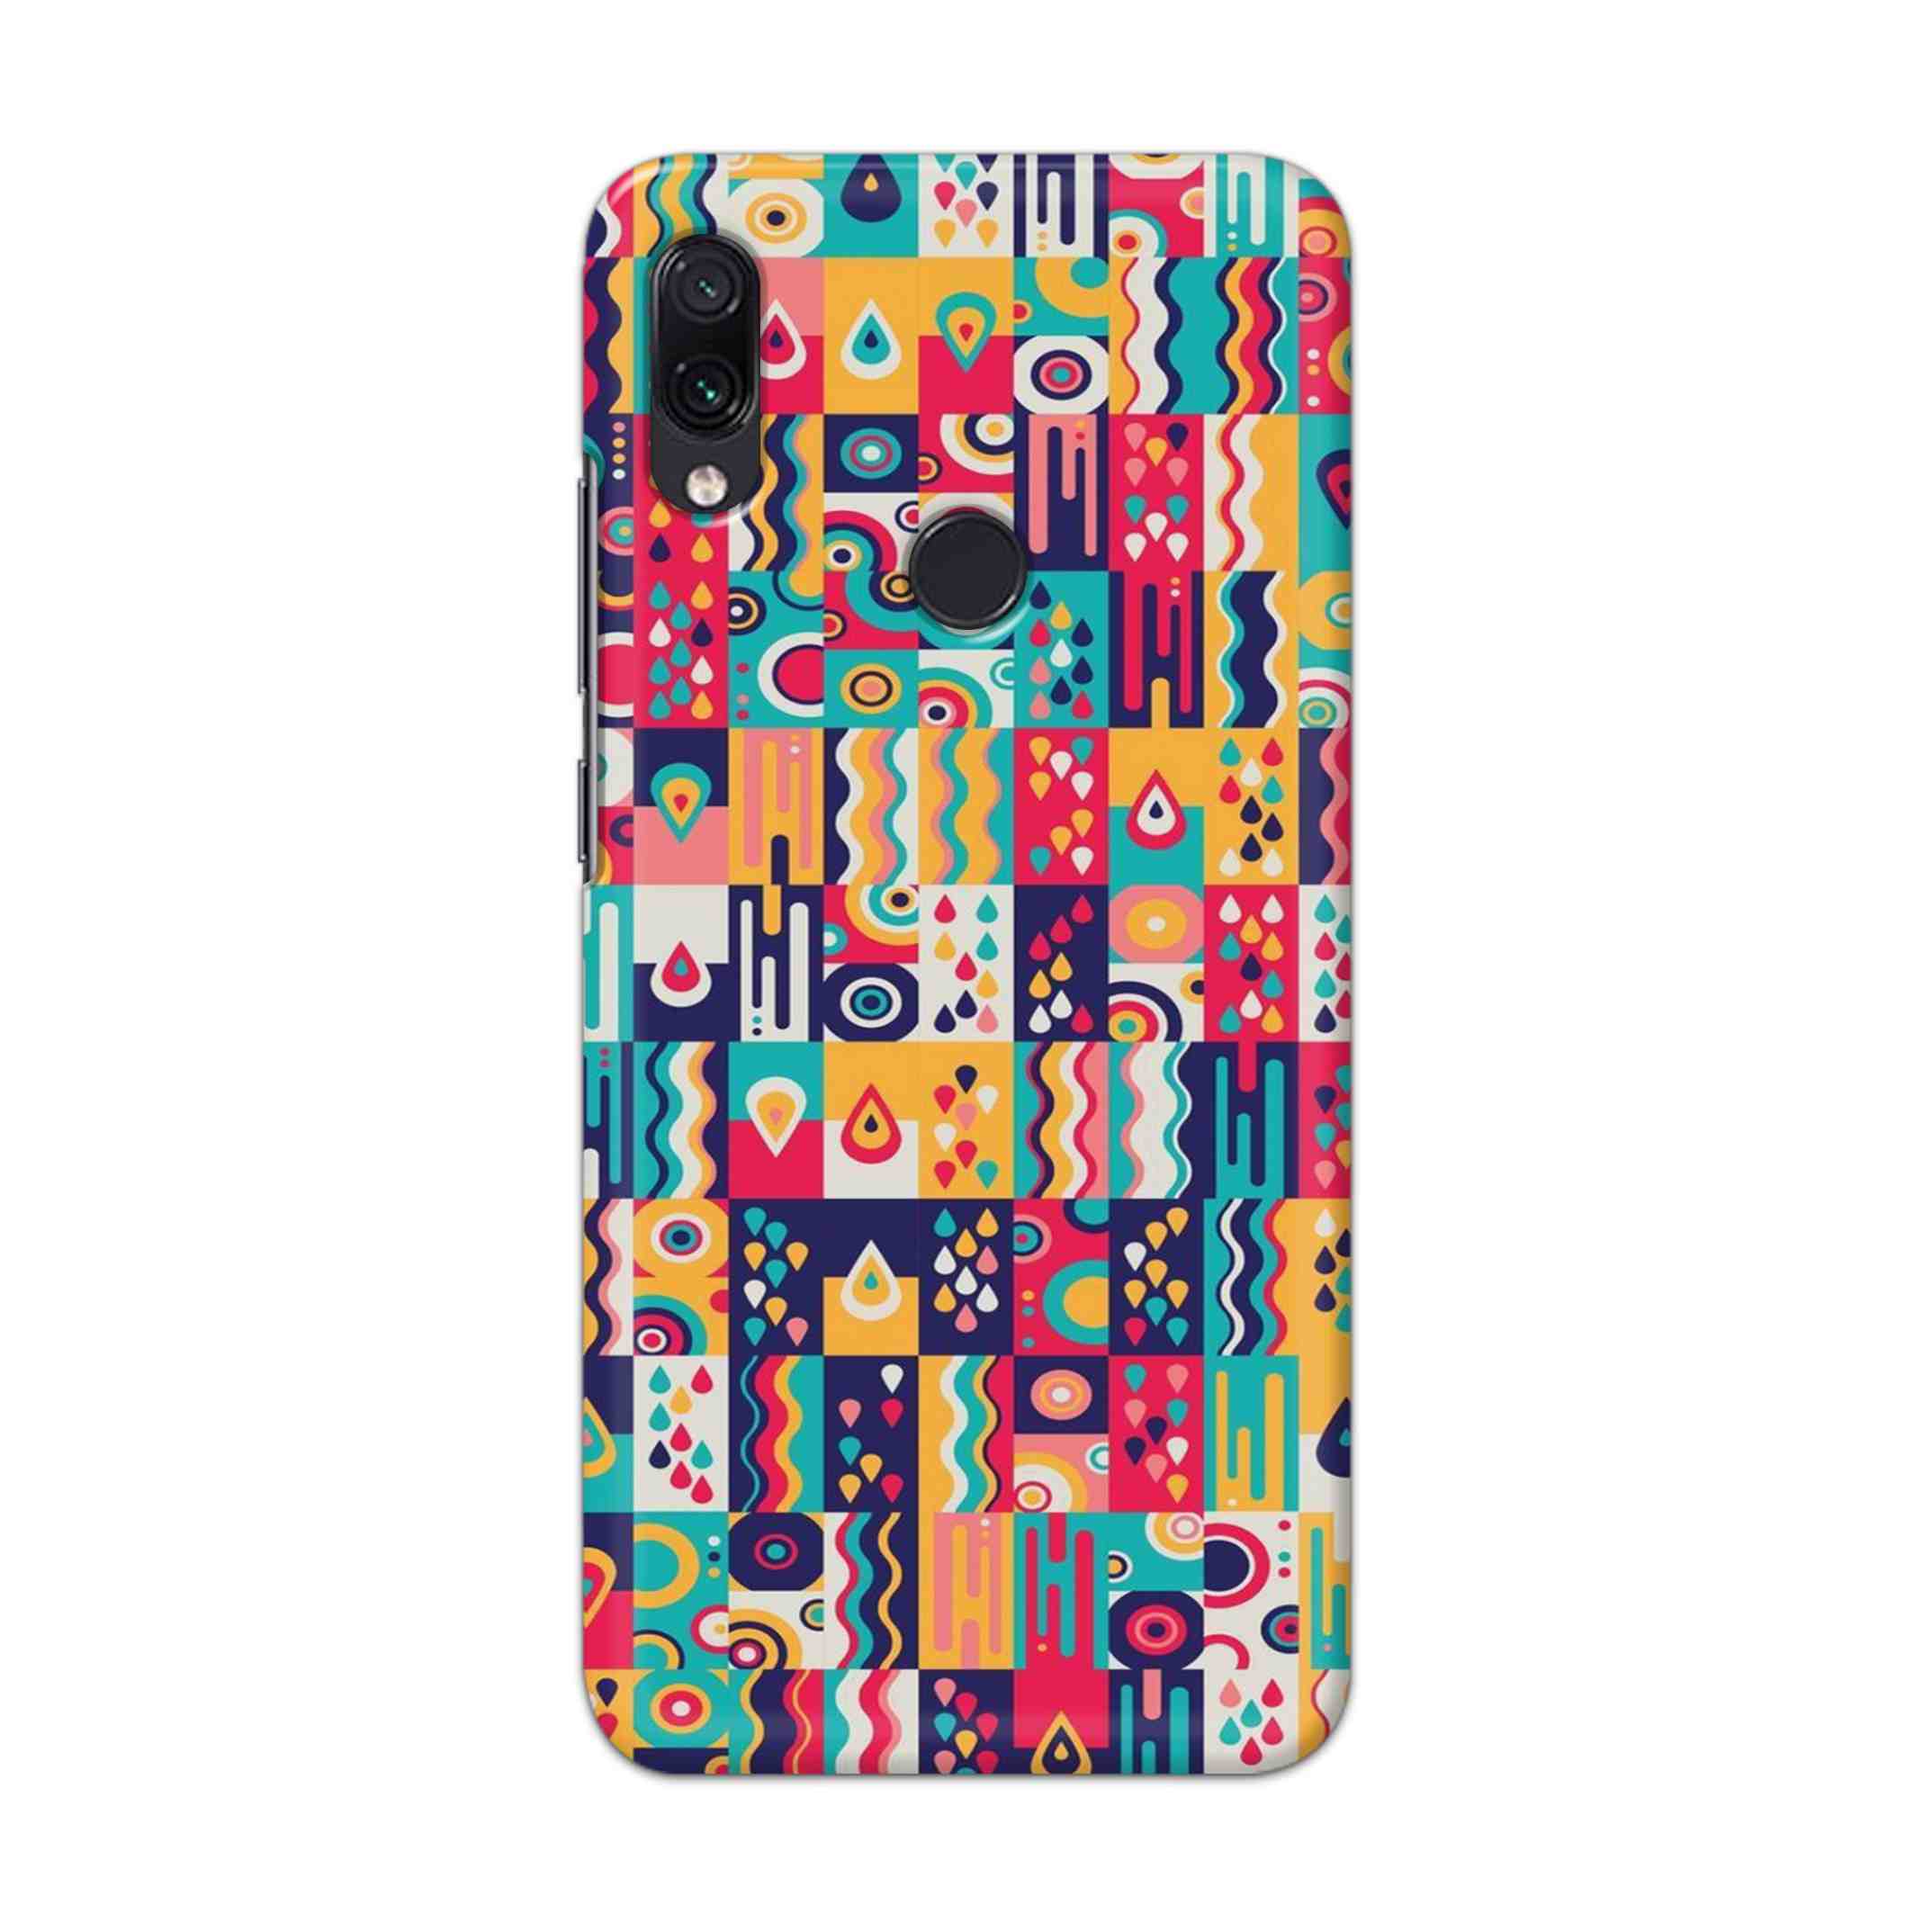 Buy Art Hard Back Mobile Phone Case Cover For Xiaomi Redmi 7 Online